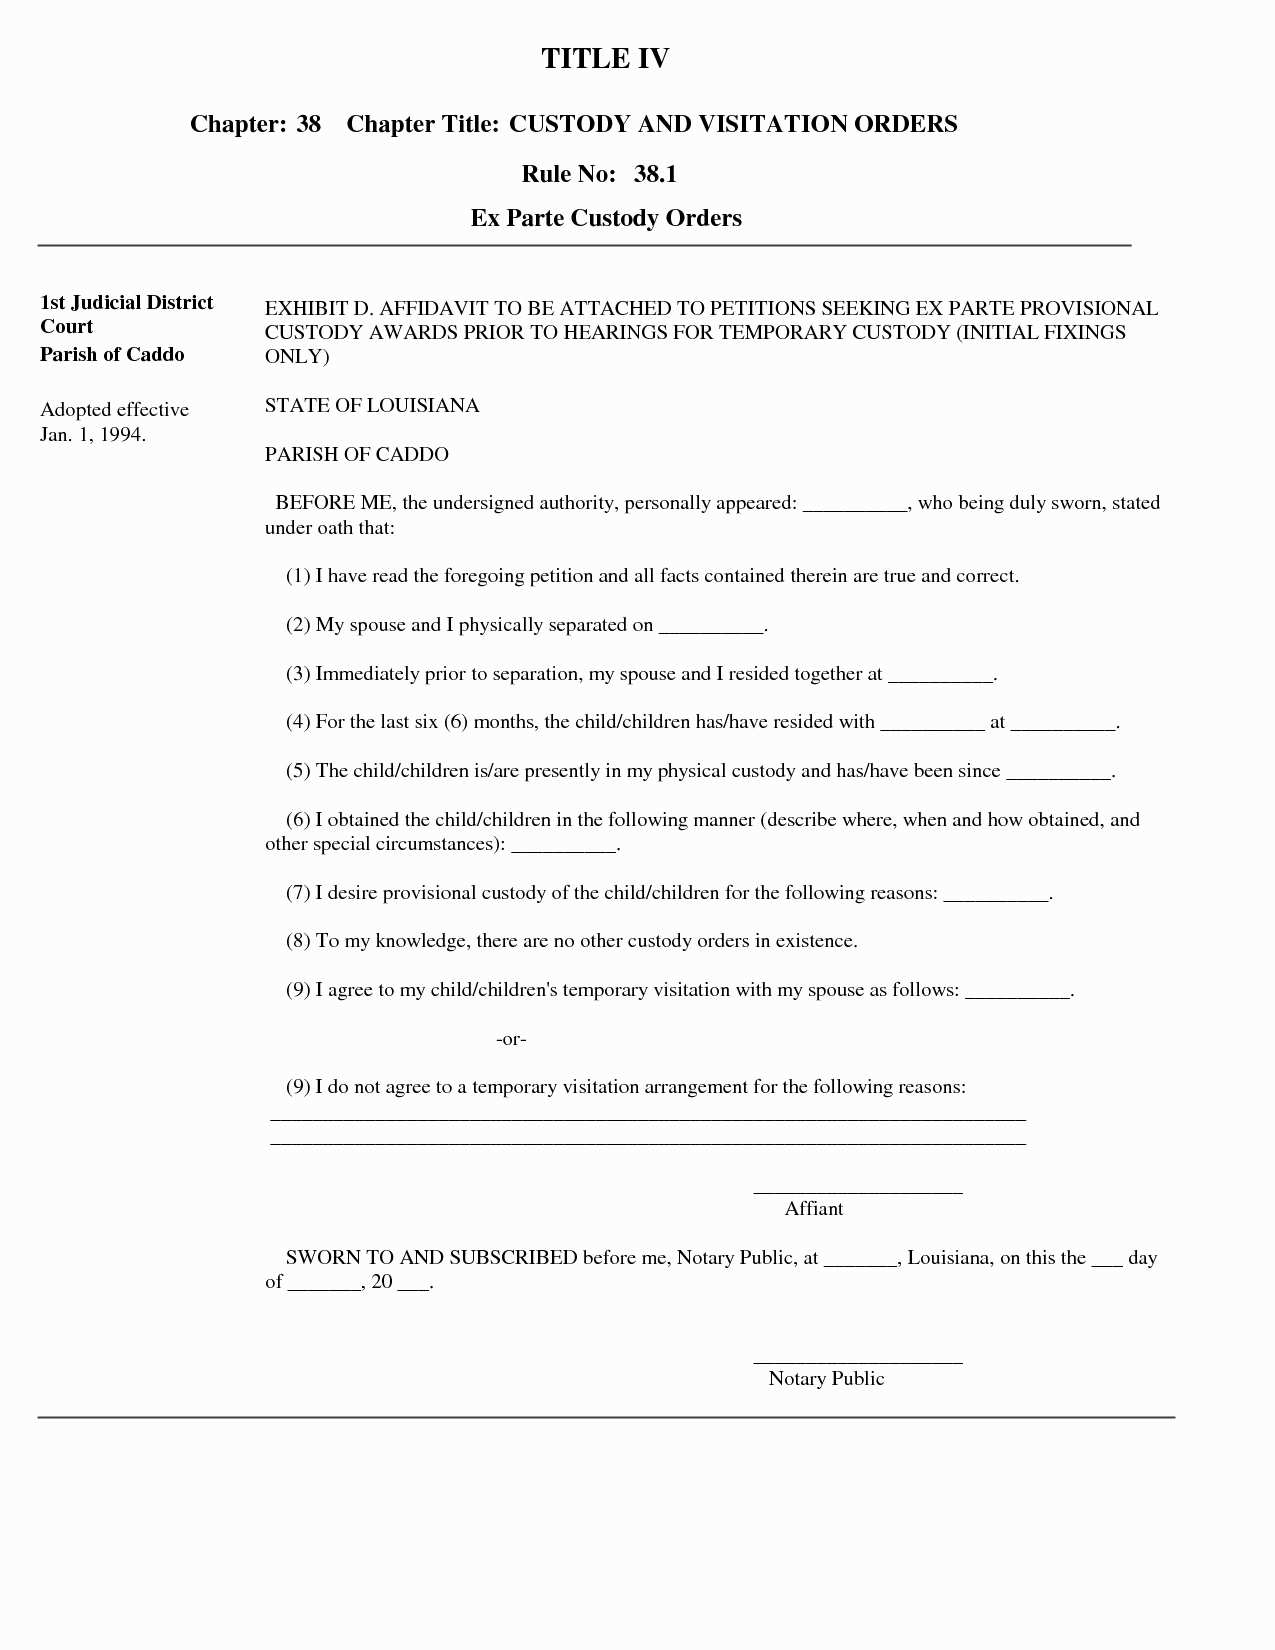 Temporary Child Custody Agreement Form 97998 Awesome Free Printable - Free Printable Child Custody Forms